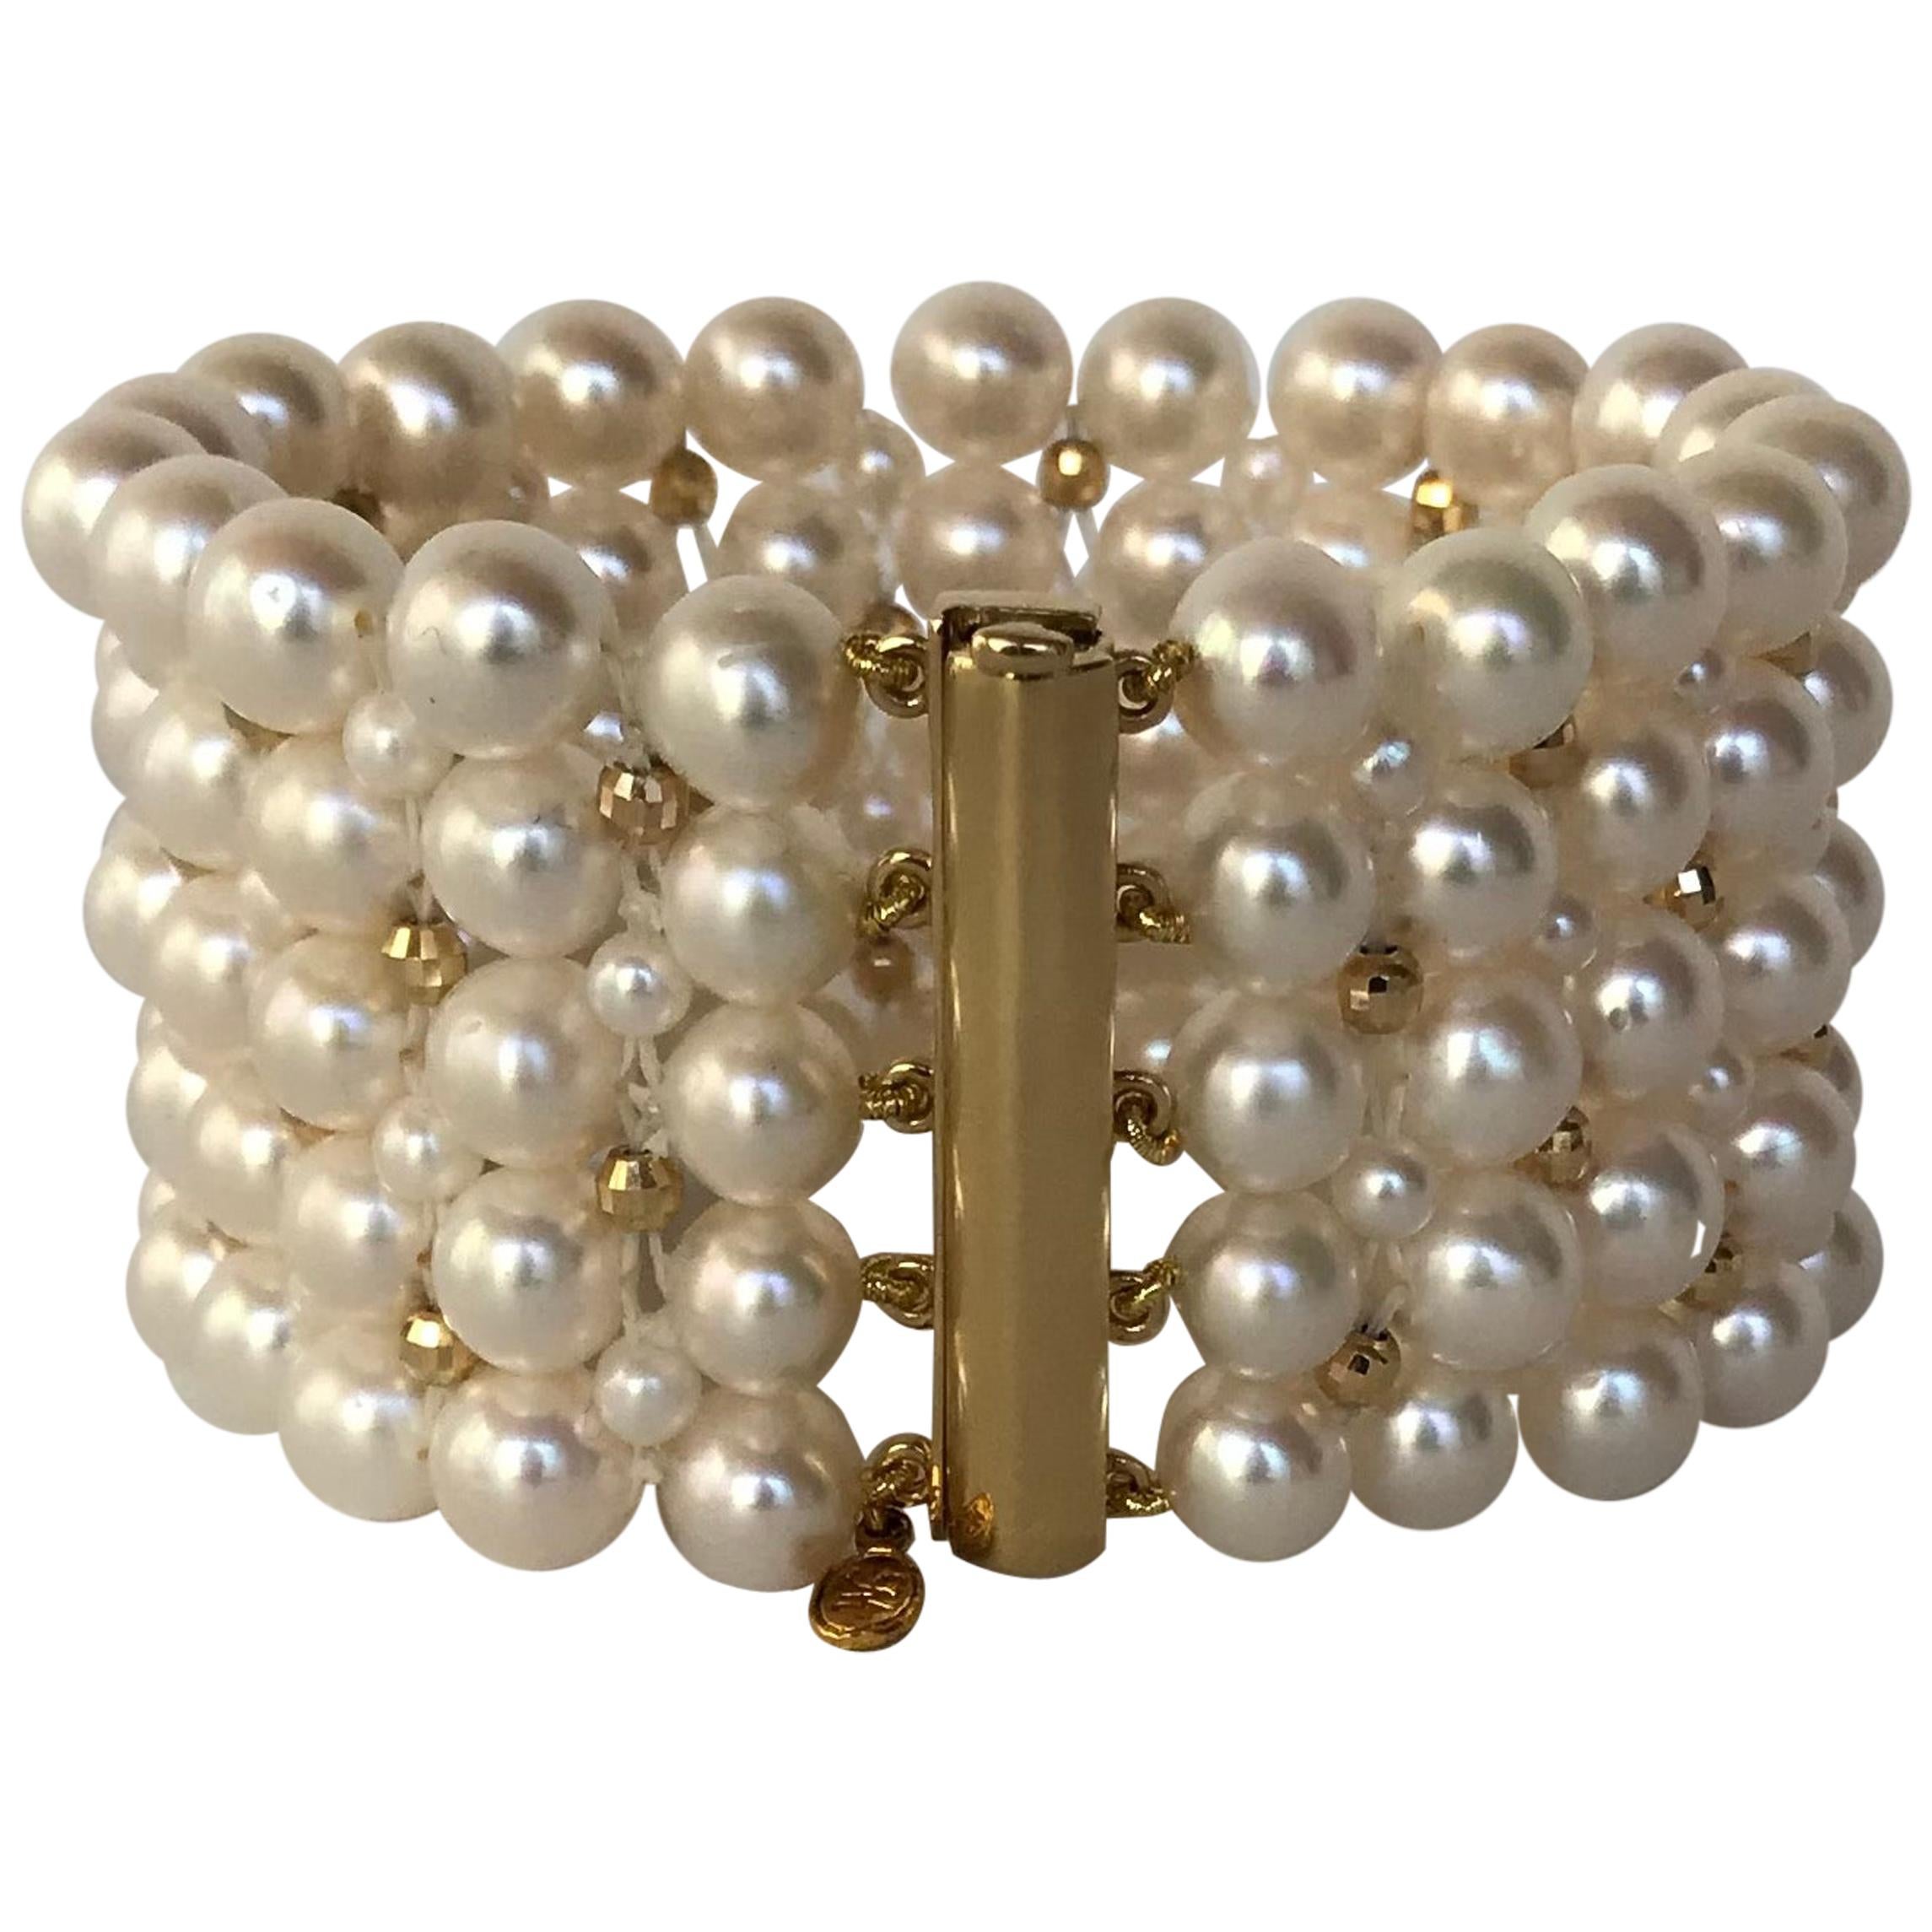 Marina J Stunning Woven Pearl Bracelet with 14 Karat Yellow Gold Beads and Clasp